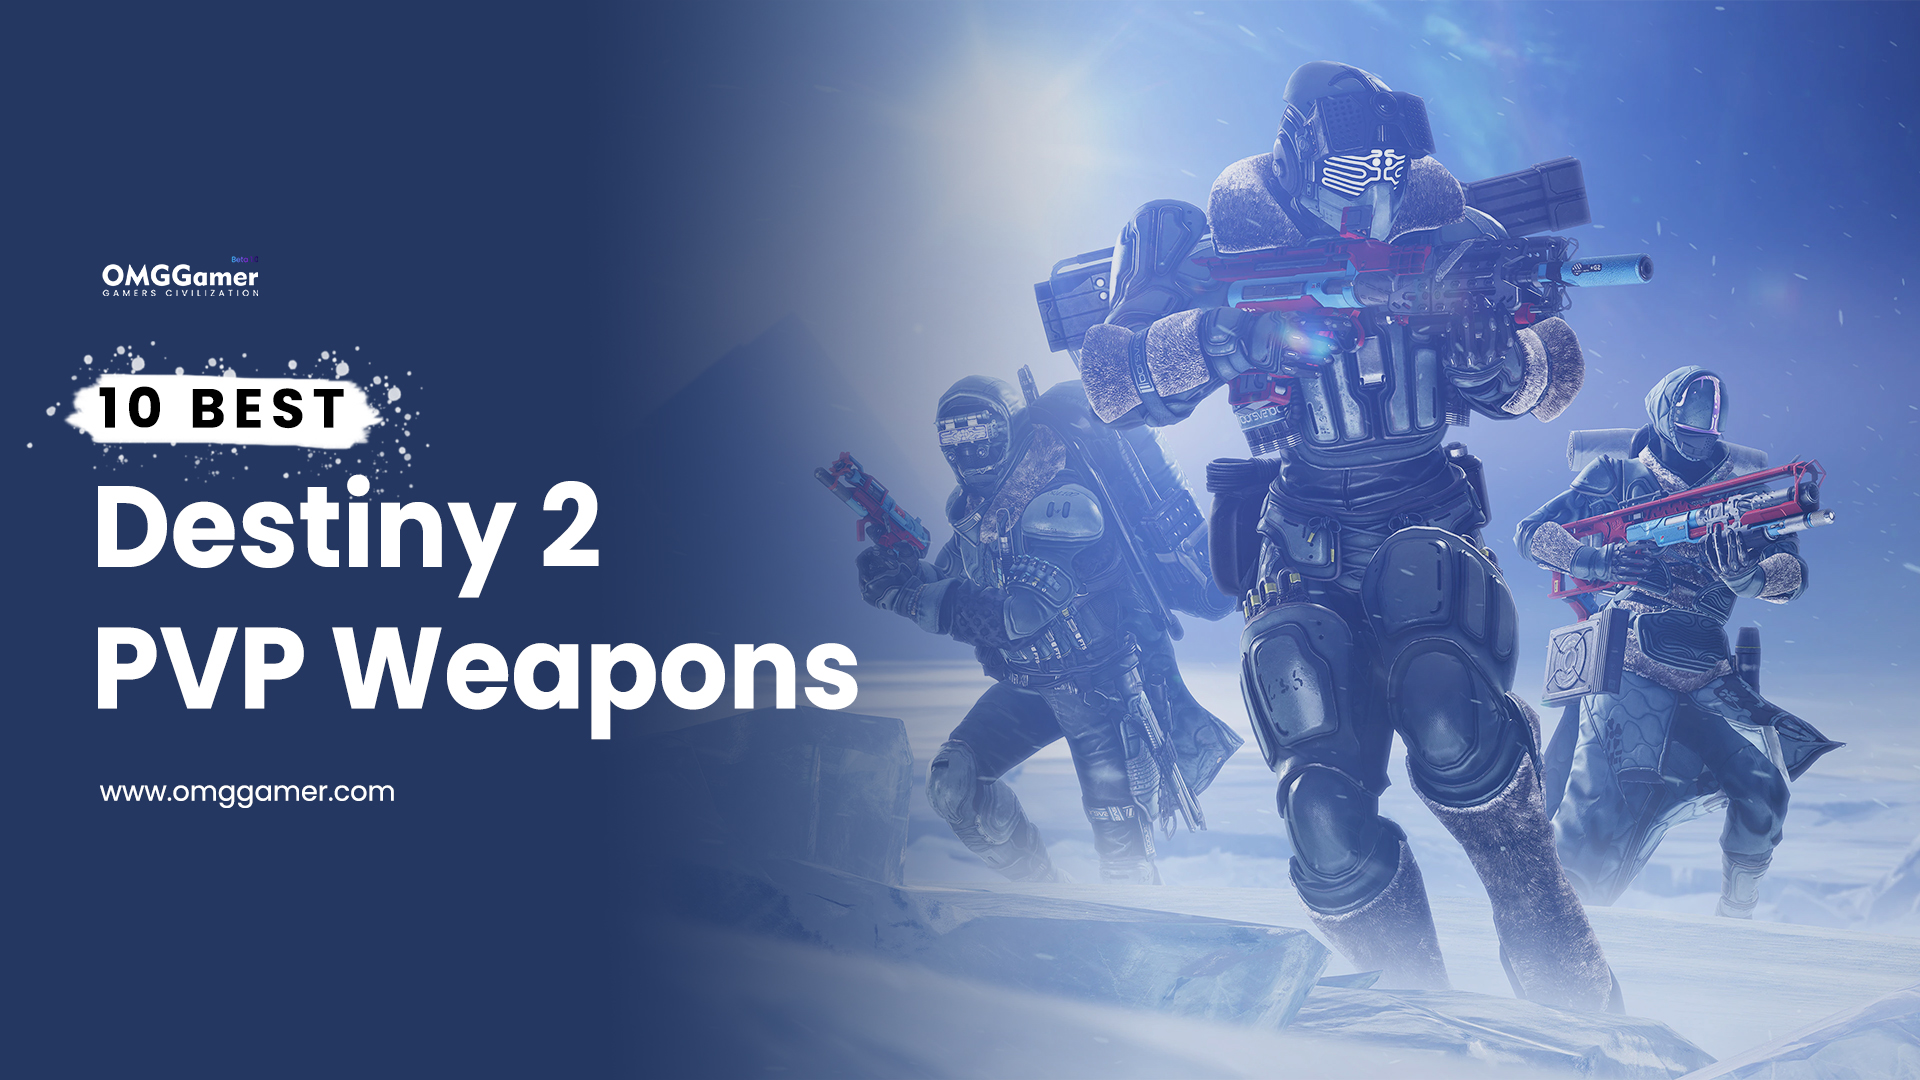 10 Best PVP Weapons Destiny 2 [Gamers Choice]